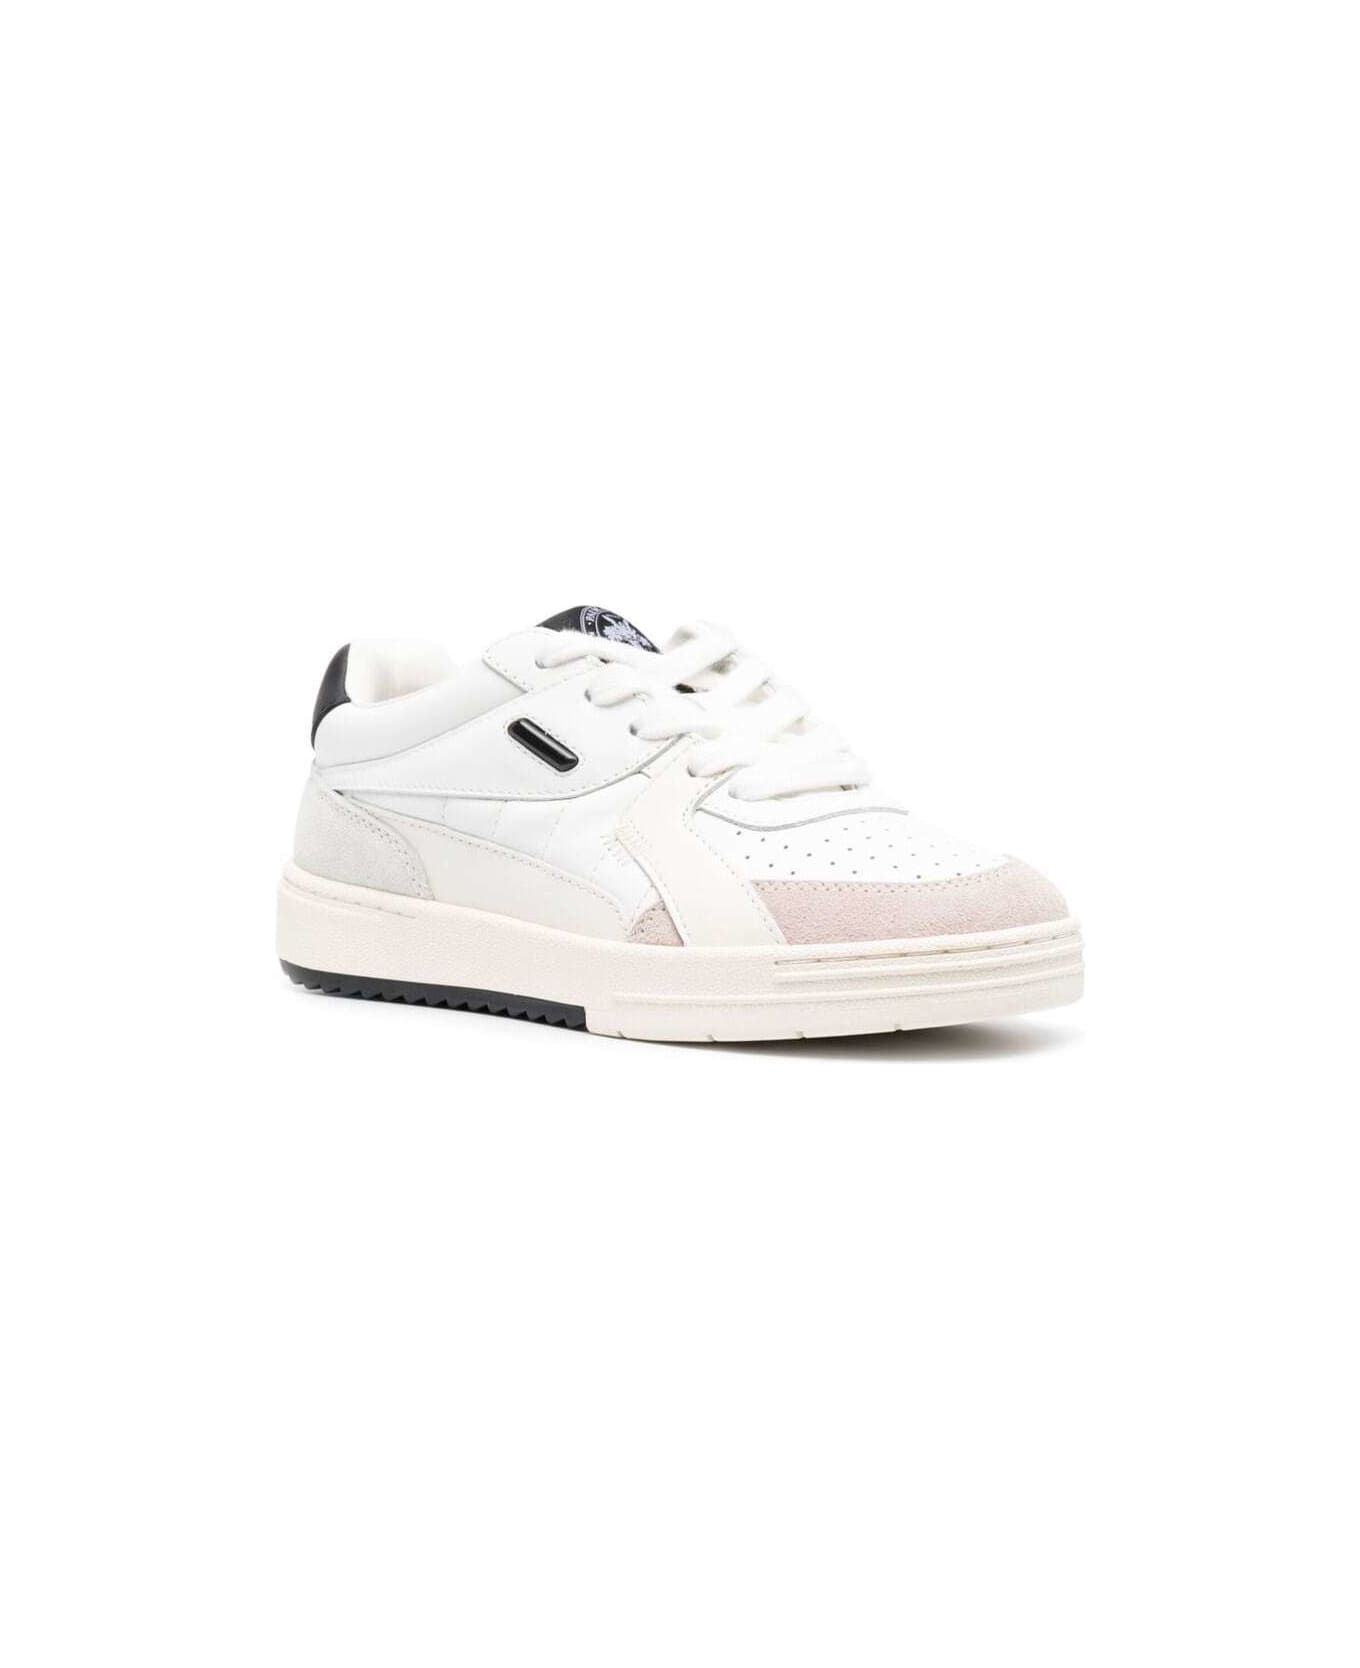 Palm Angels Palm University Low Top Sneakers In White And Black Sneakers Woman - White